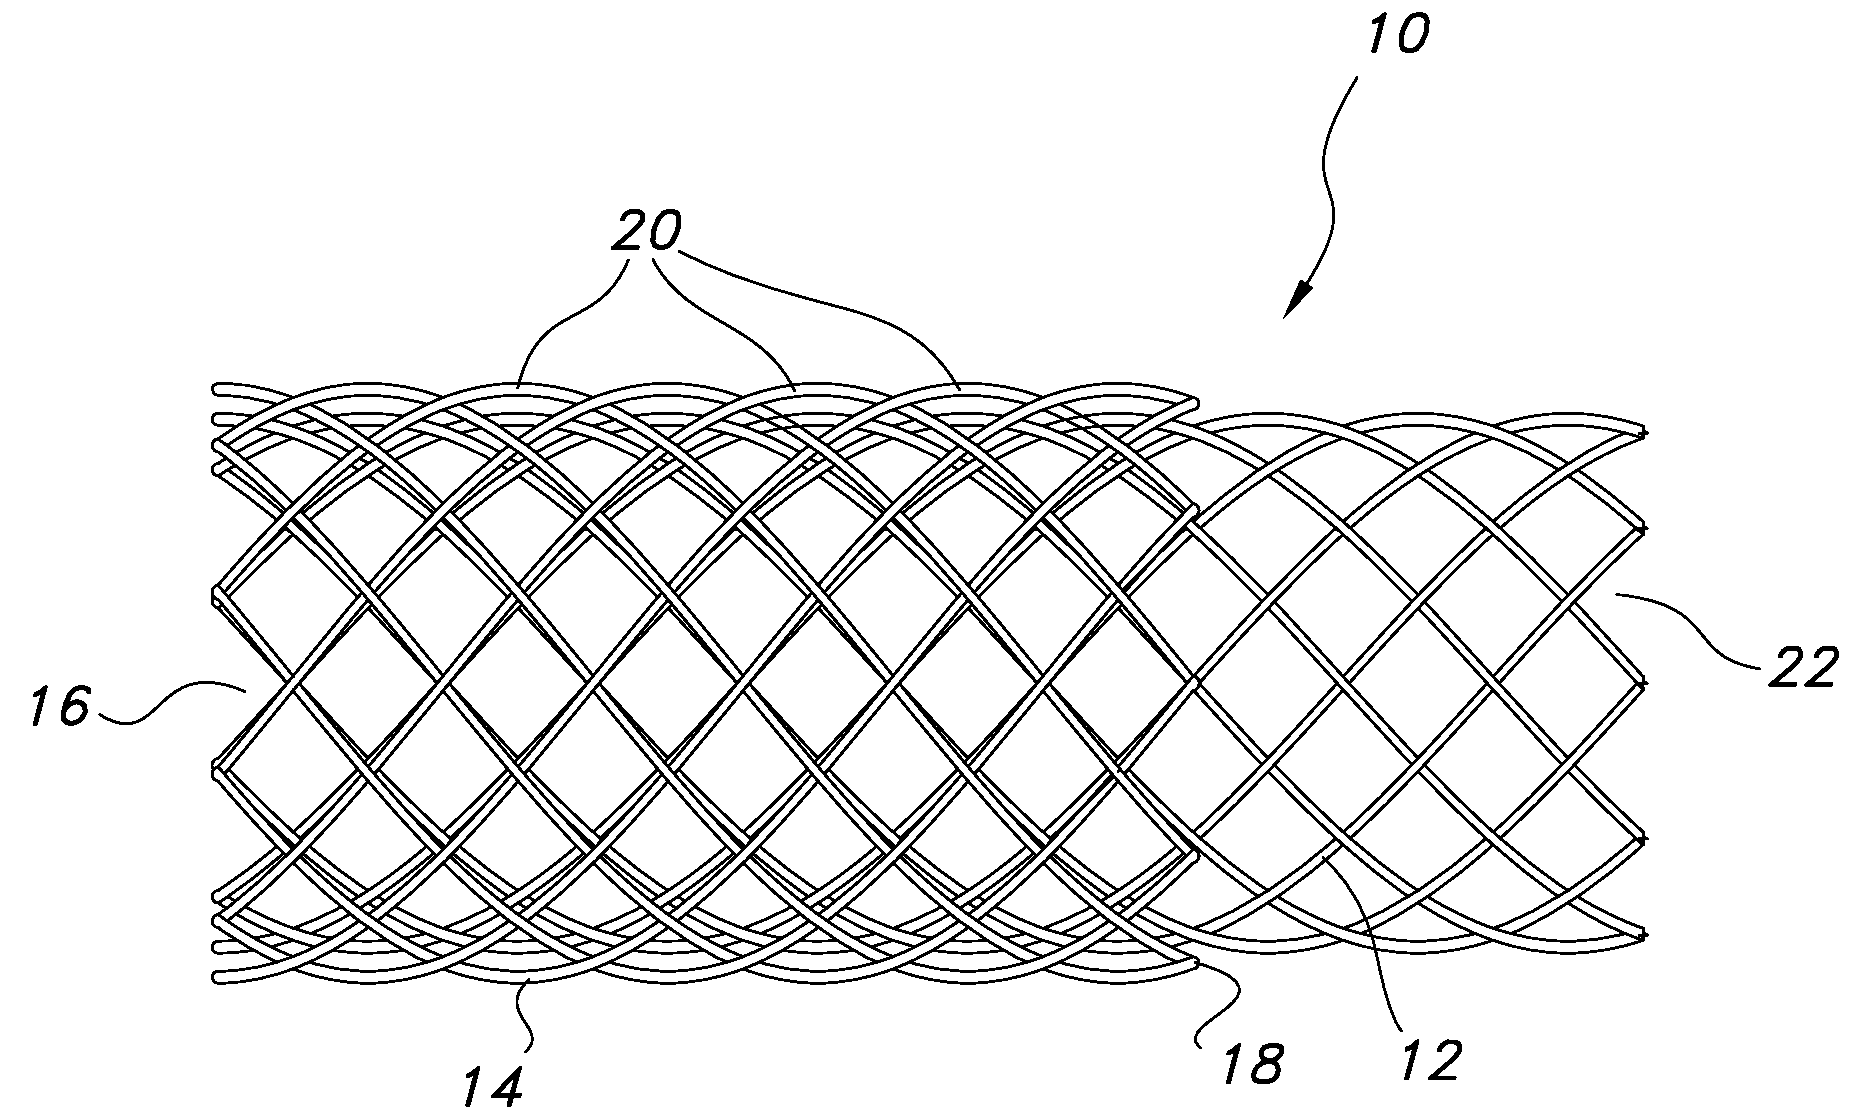 Continuous double layered stent for migration resistance